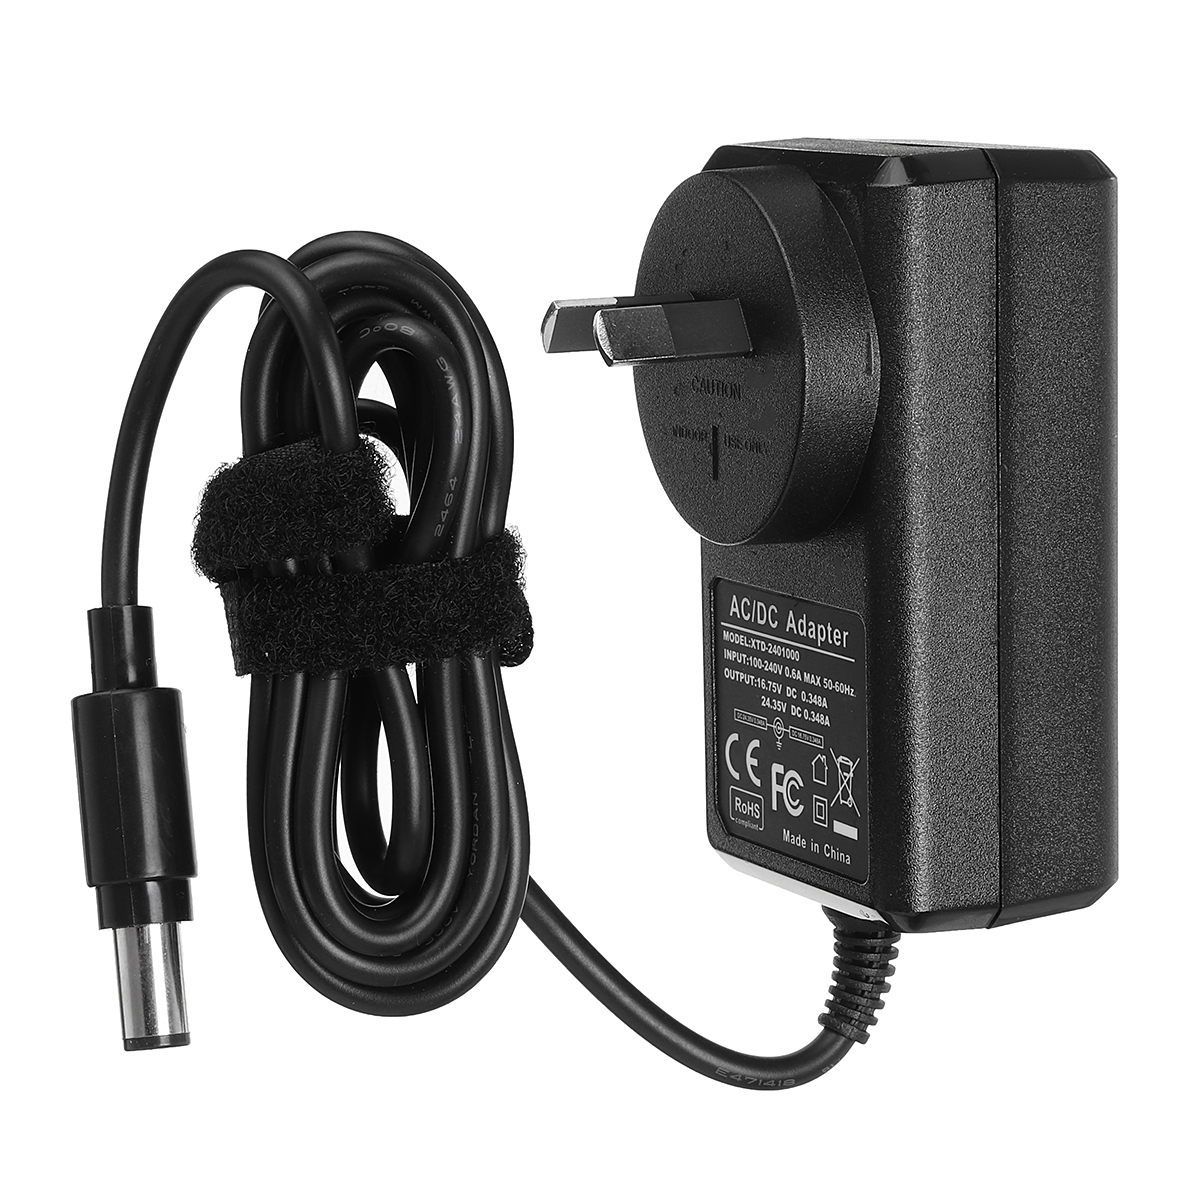 Find 100 240V Battery Charger Power Supply Adapter For Dyson DC30 DC31 DC32 DC33 DC40 DC41 DC42 DC43 DC44 DC45 DC55 DC56 DC57 for Sale on Gipsybee.com with cryptocurrencies